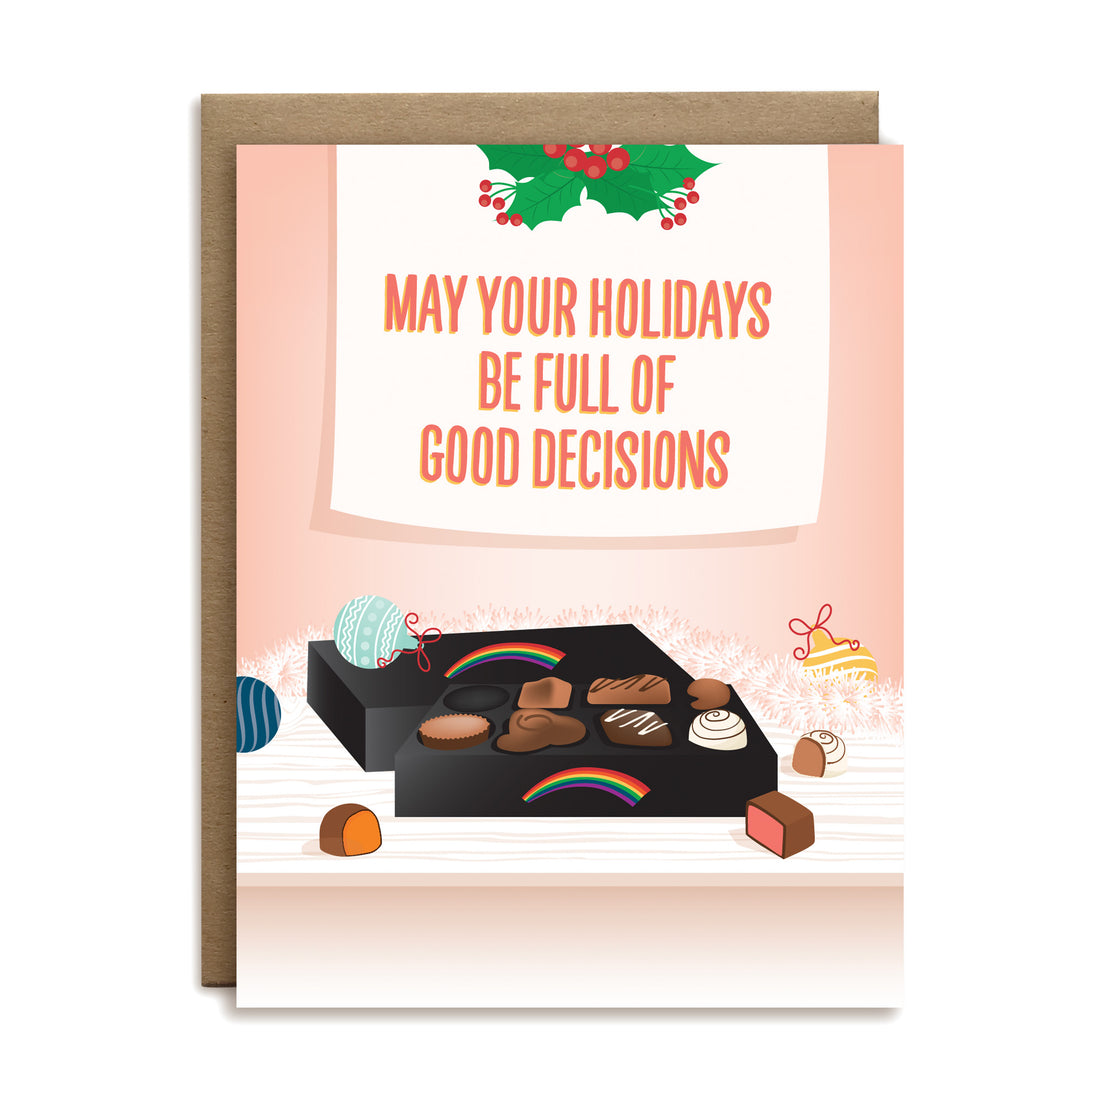 May your holidays be full of good decisions, box of chocolates holiday greeting card by I’ll Know It When I See It